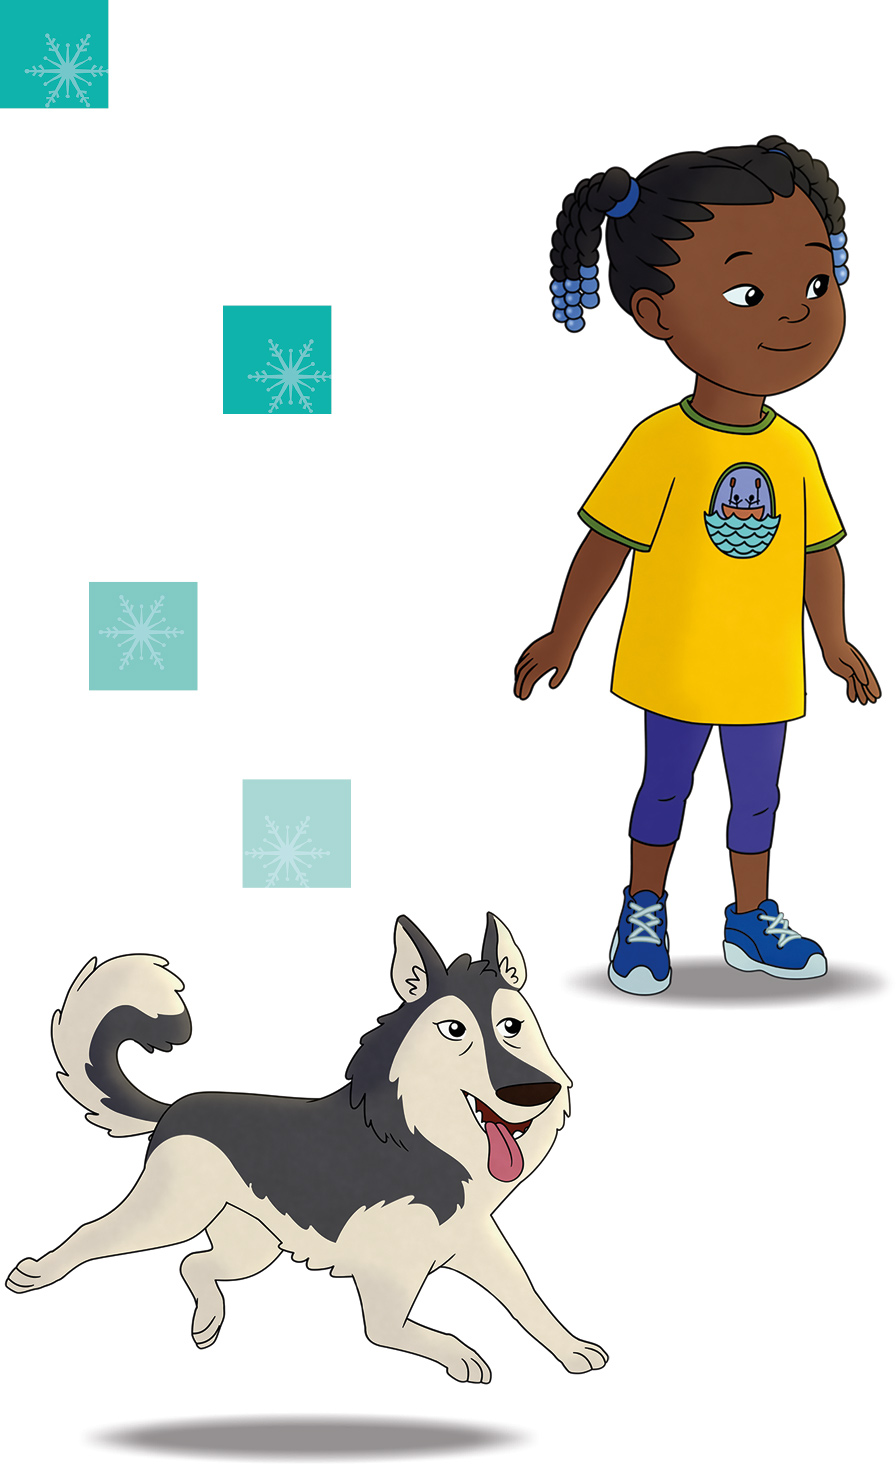 a young girl with a yellow t-shirt and purple leggings and a running husky-type dog with it’s tongue out